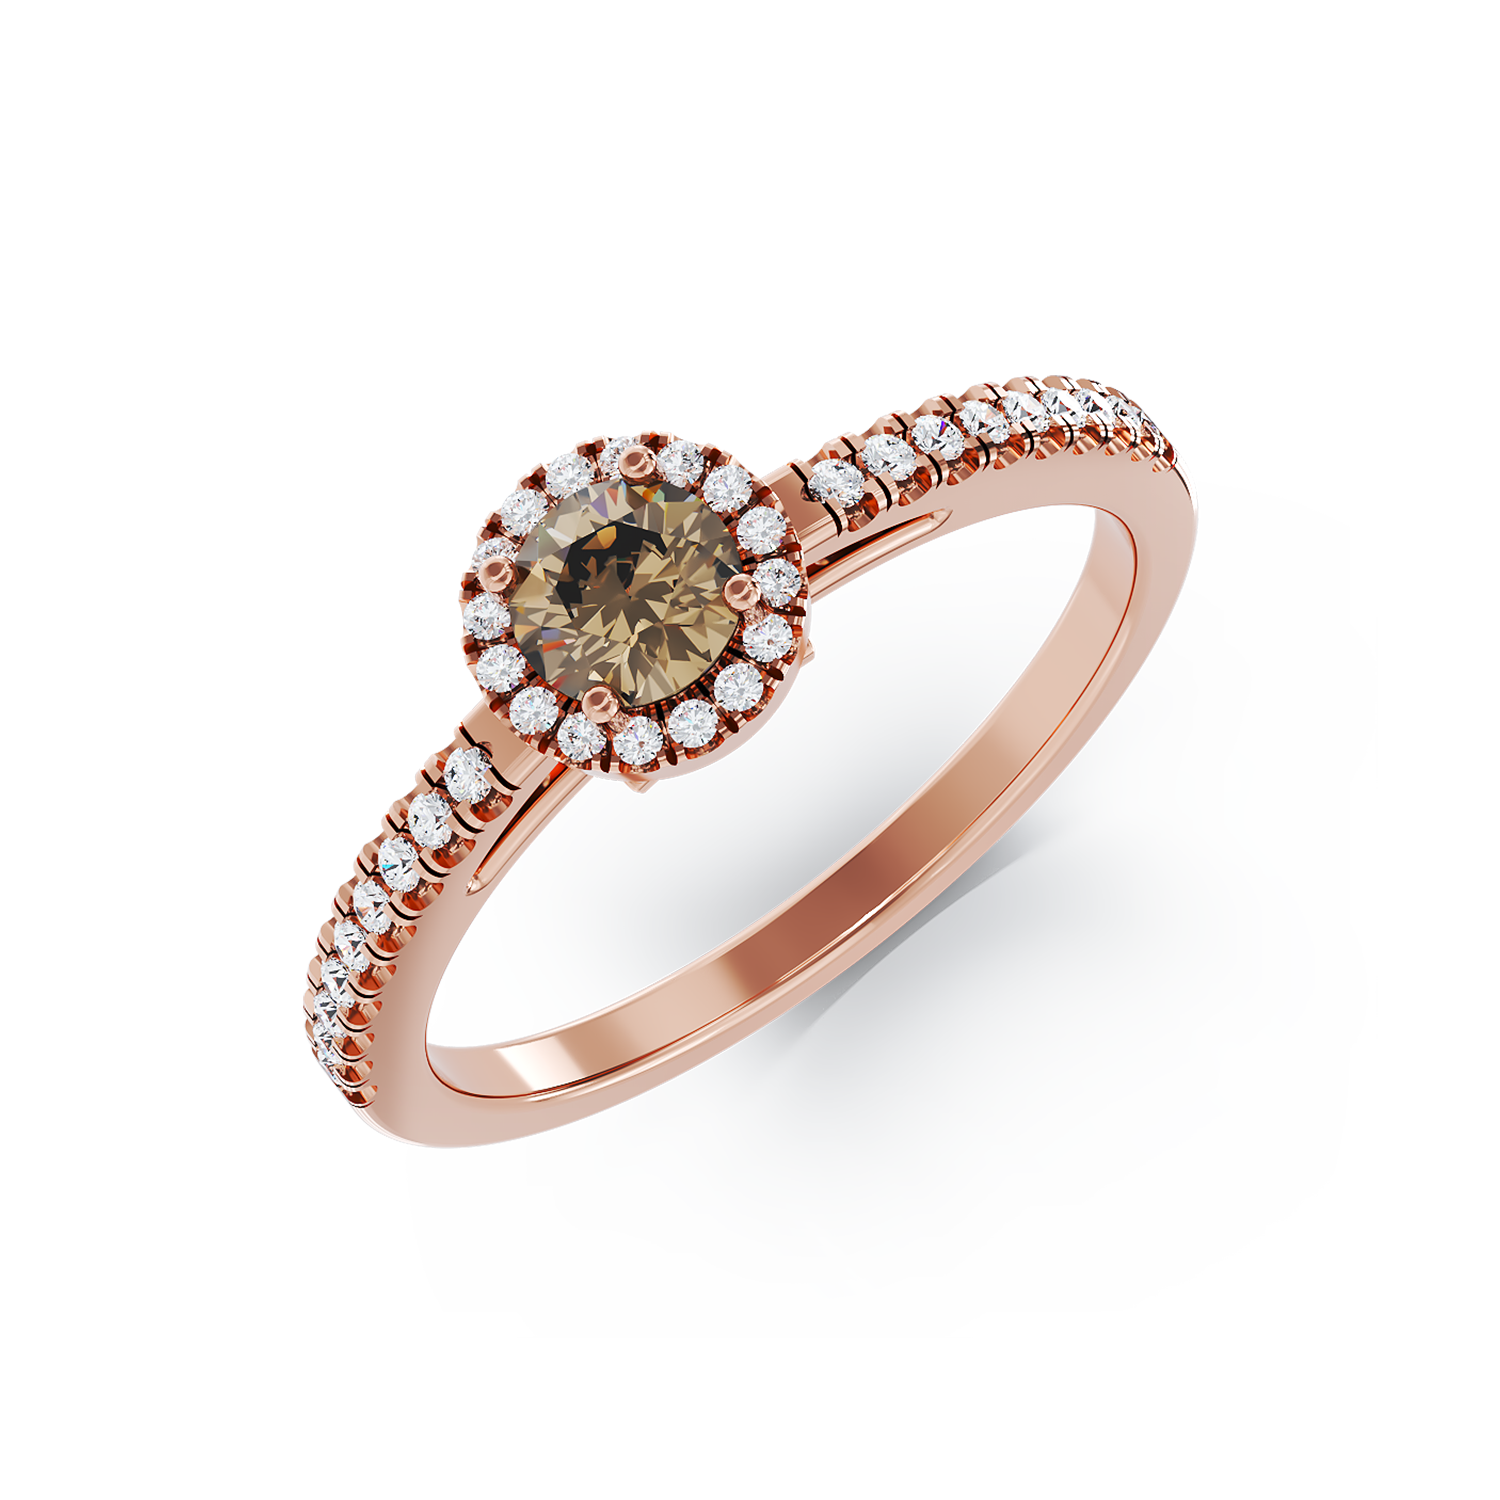 18K rose gold engagement ring with 0.31ct brown diamond and 0.19ct diamonds